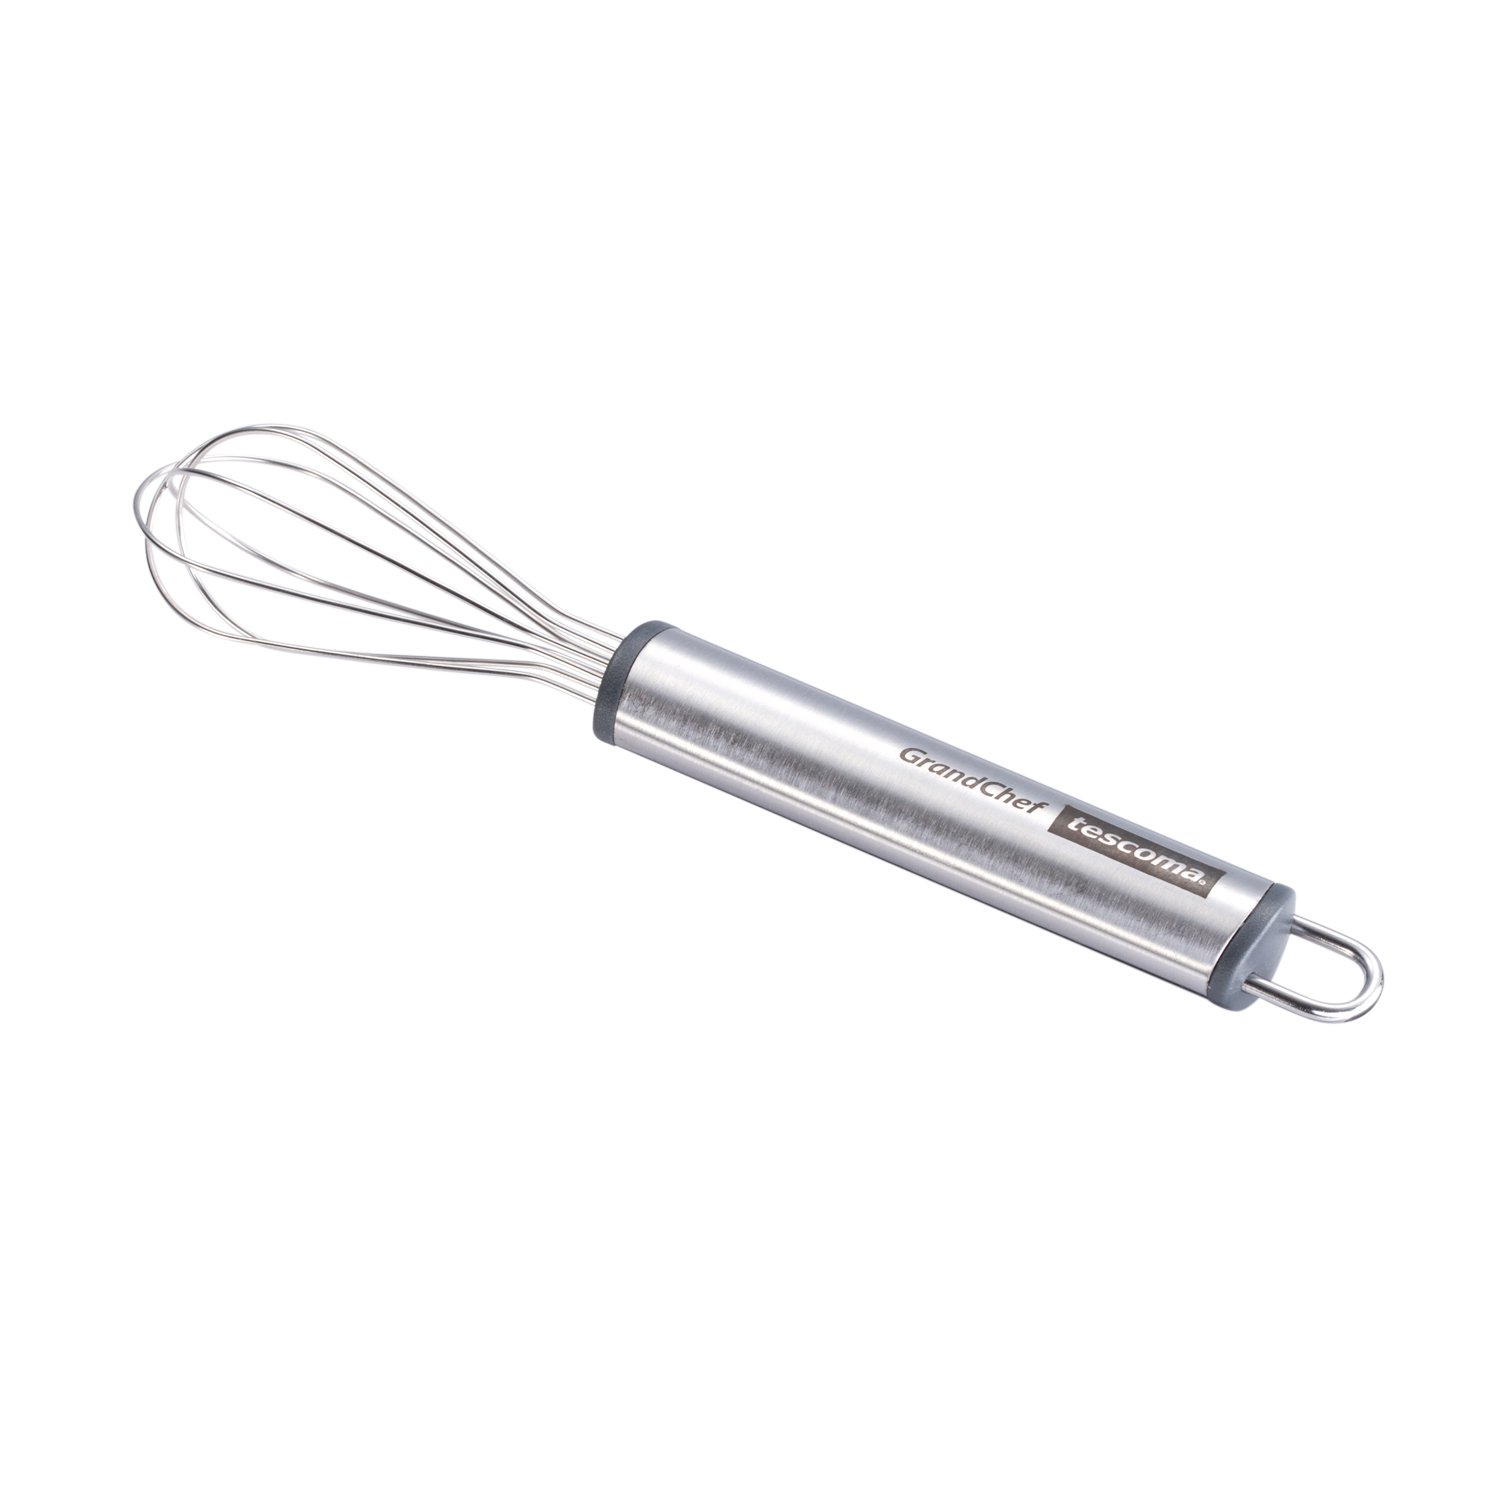 Tescoma 428286 Mini Whisk, Stainless Steel, Grey